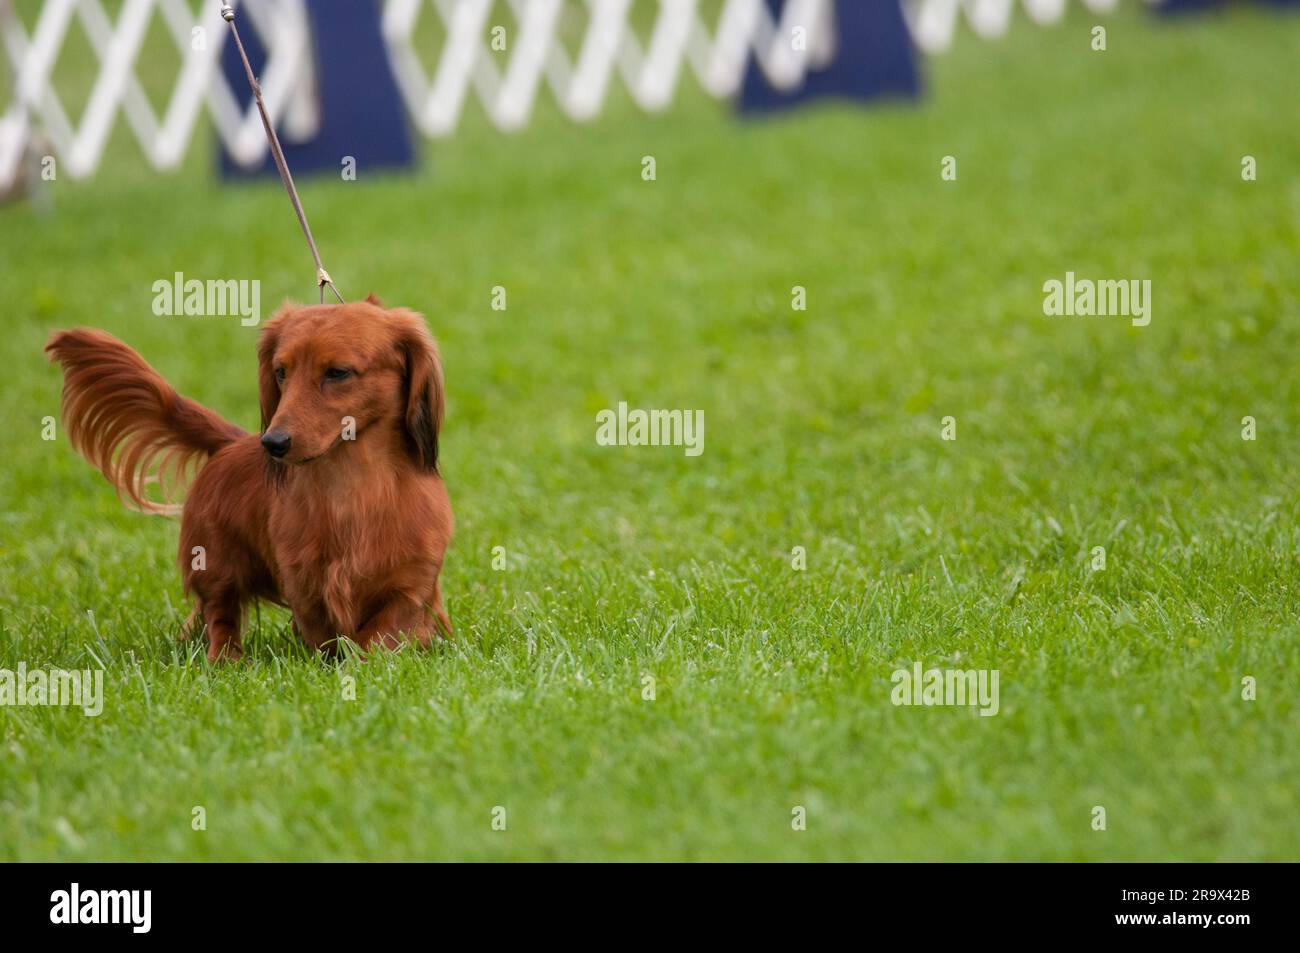 Short little Longhaired Dachshund walking in the dog show ring Stock Photo